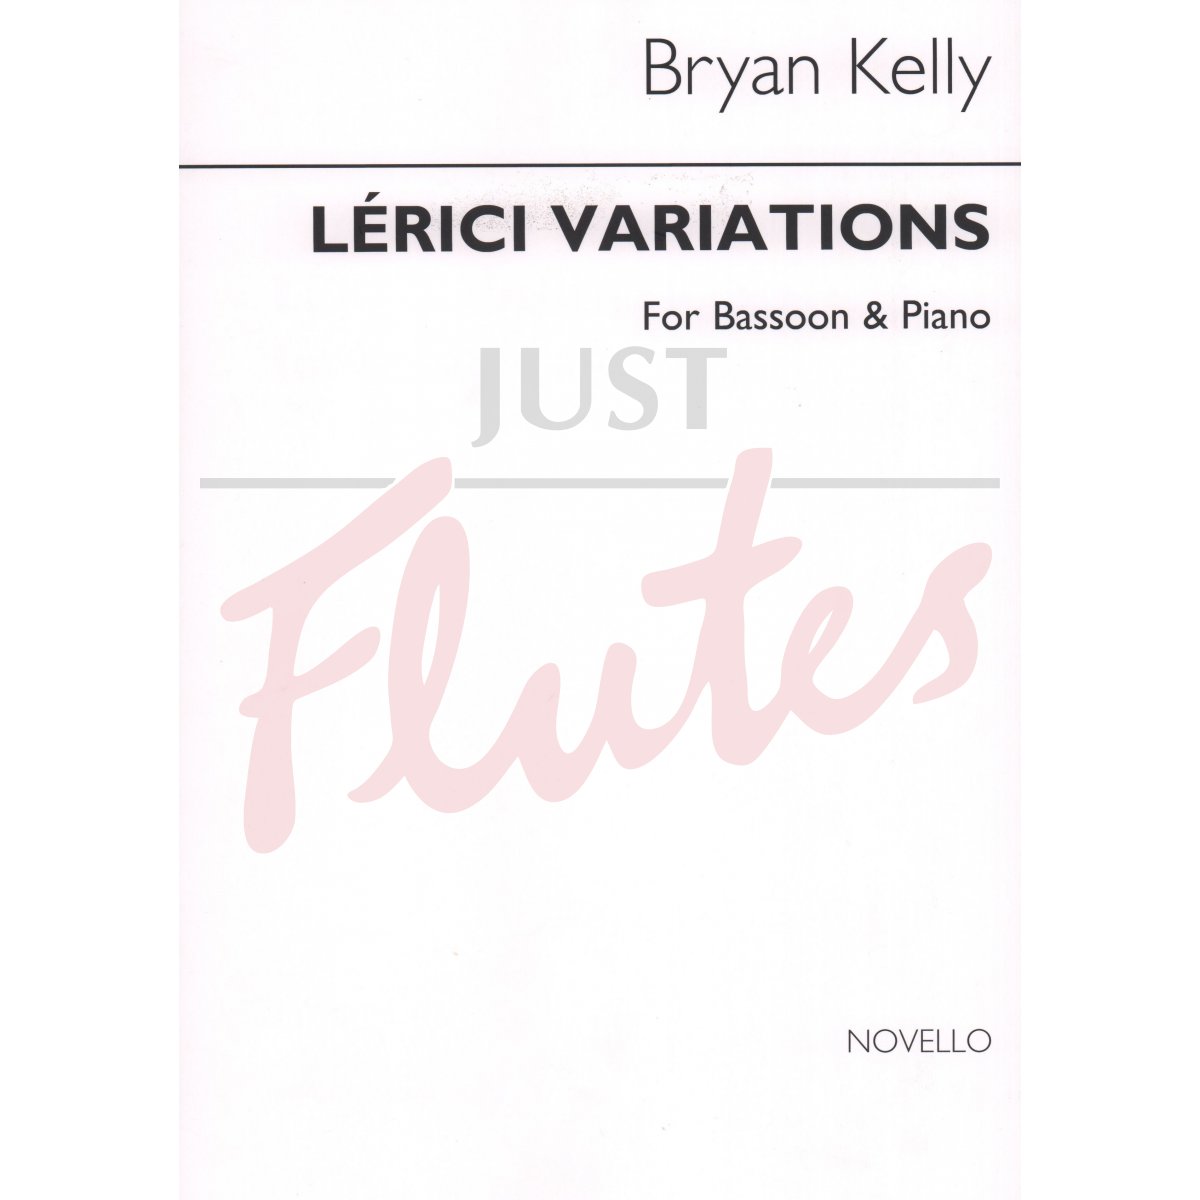 Lerici Variations for Bassoon and Piano